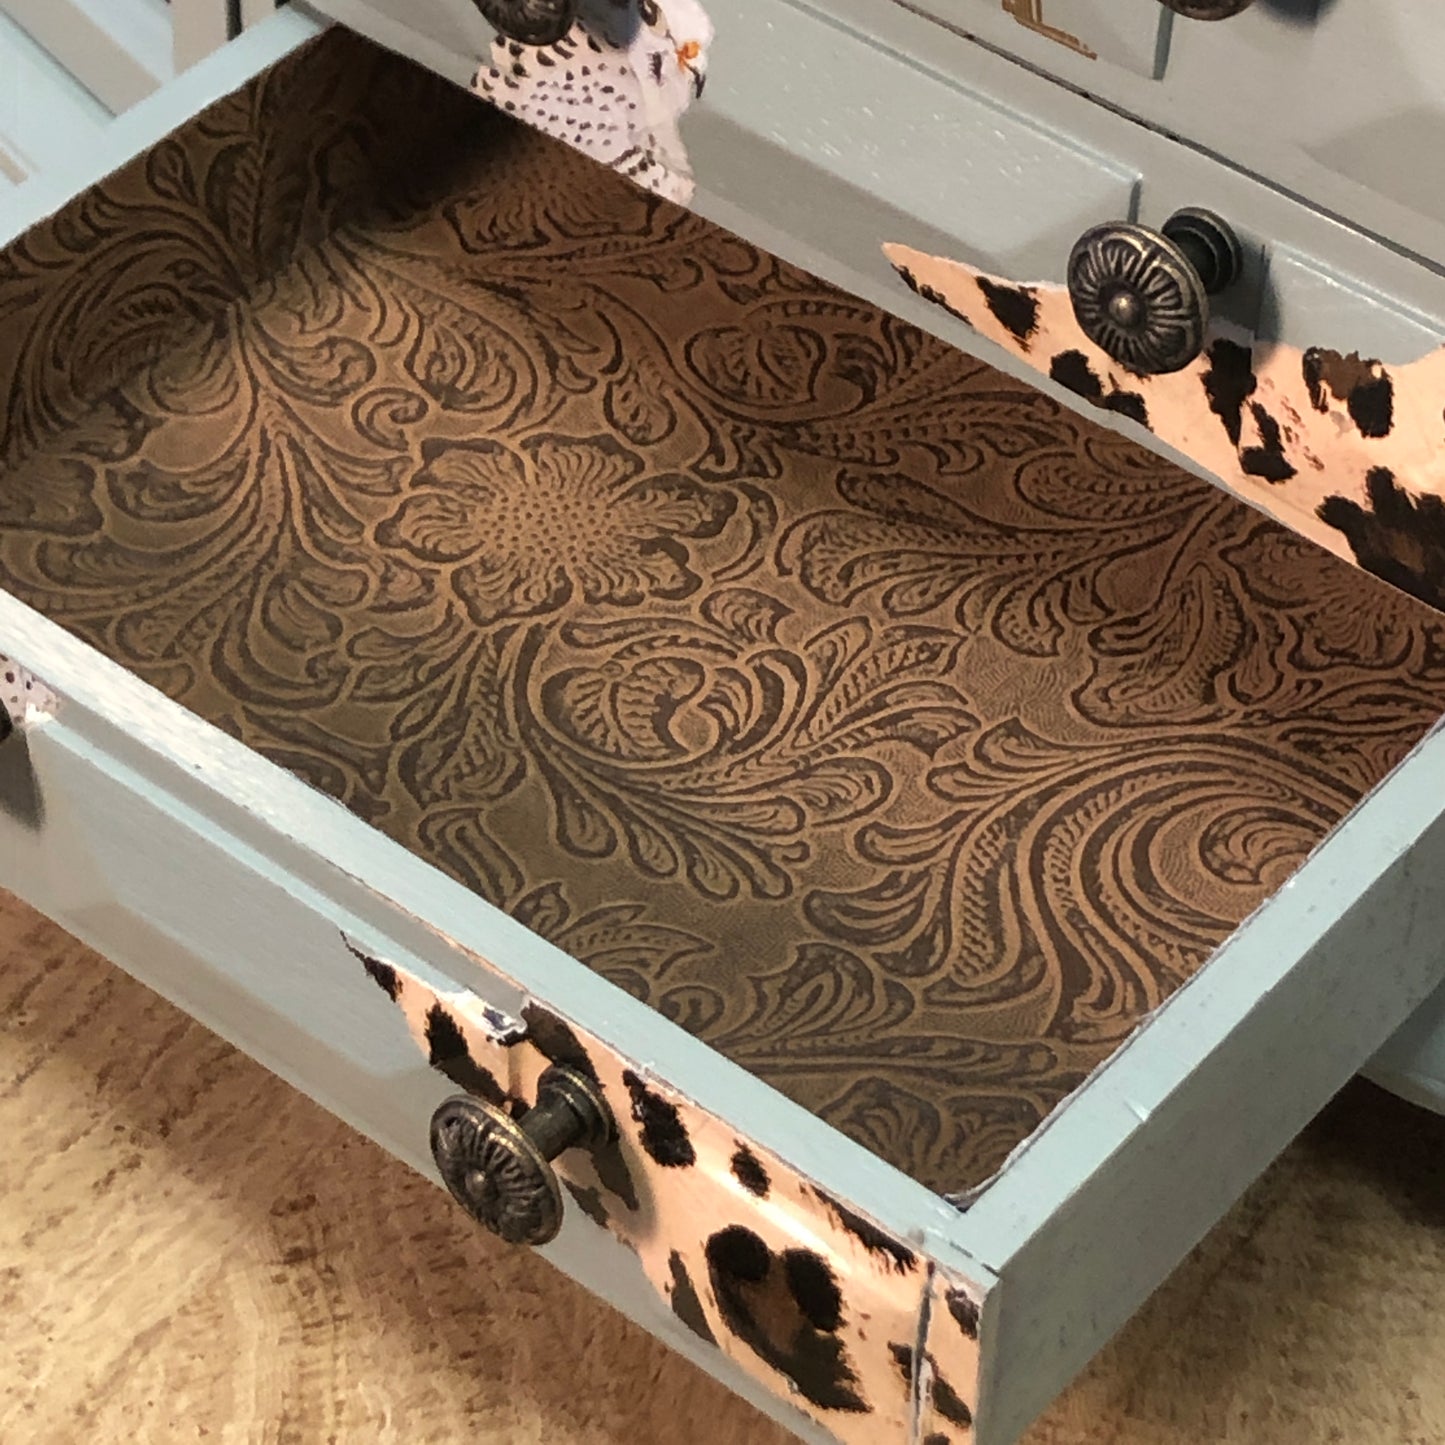 Meet Cowgirl, Table Top Jewelry Box